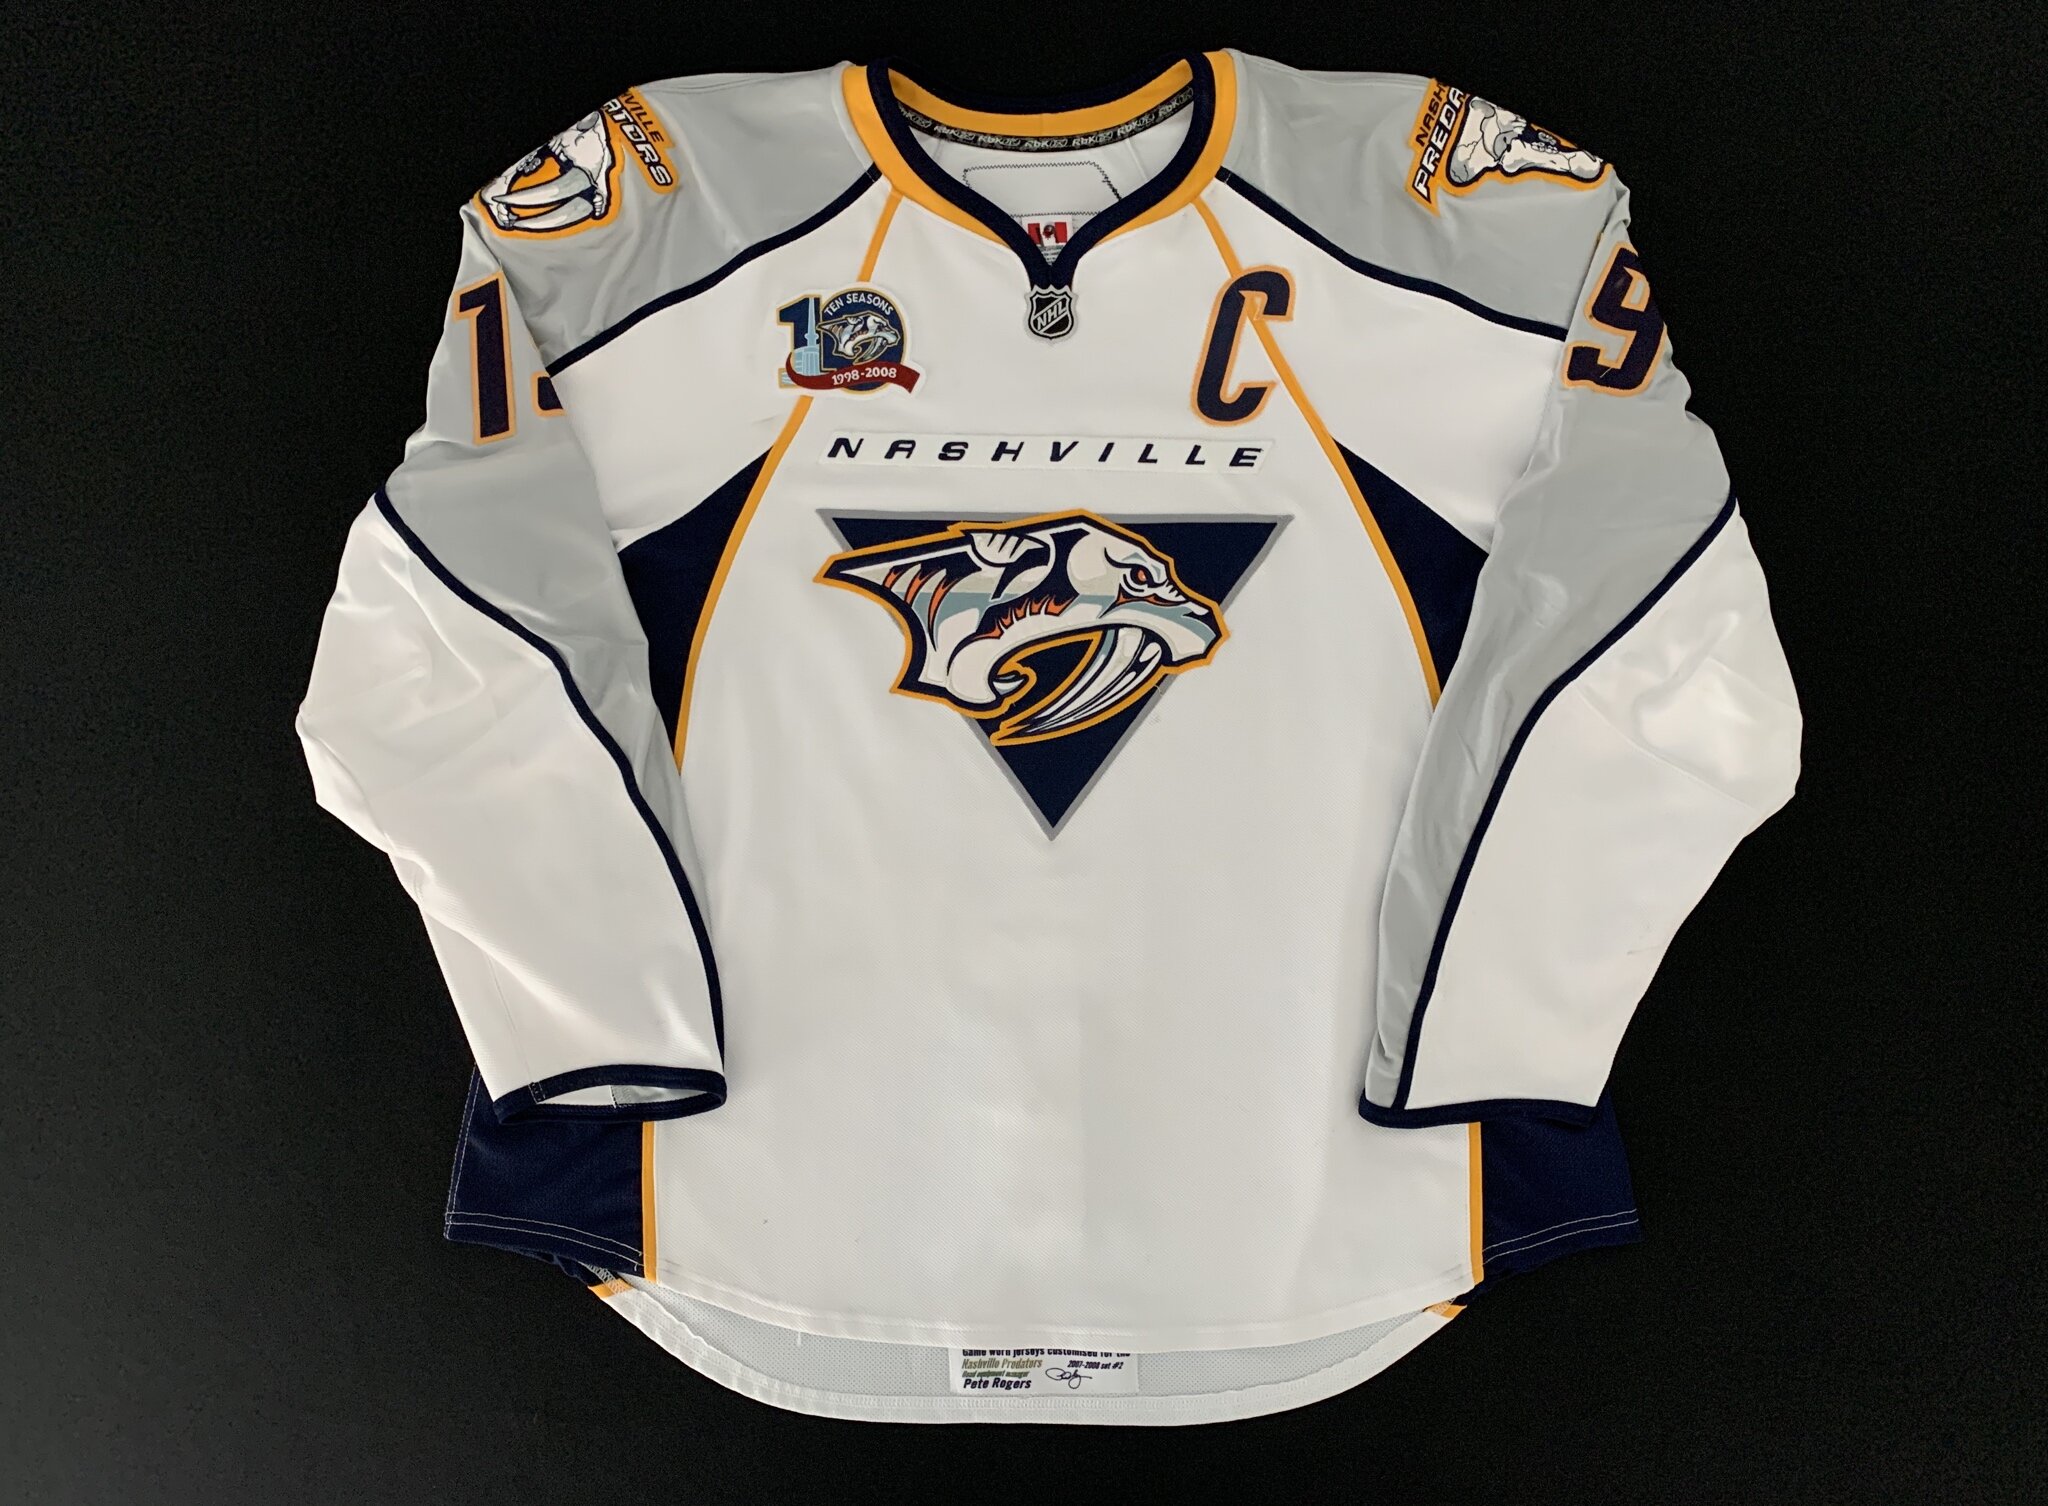 Game-Used Hockey Jerseys Galore at GameWornAuctions.net - Sports Collectors  Digest